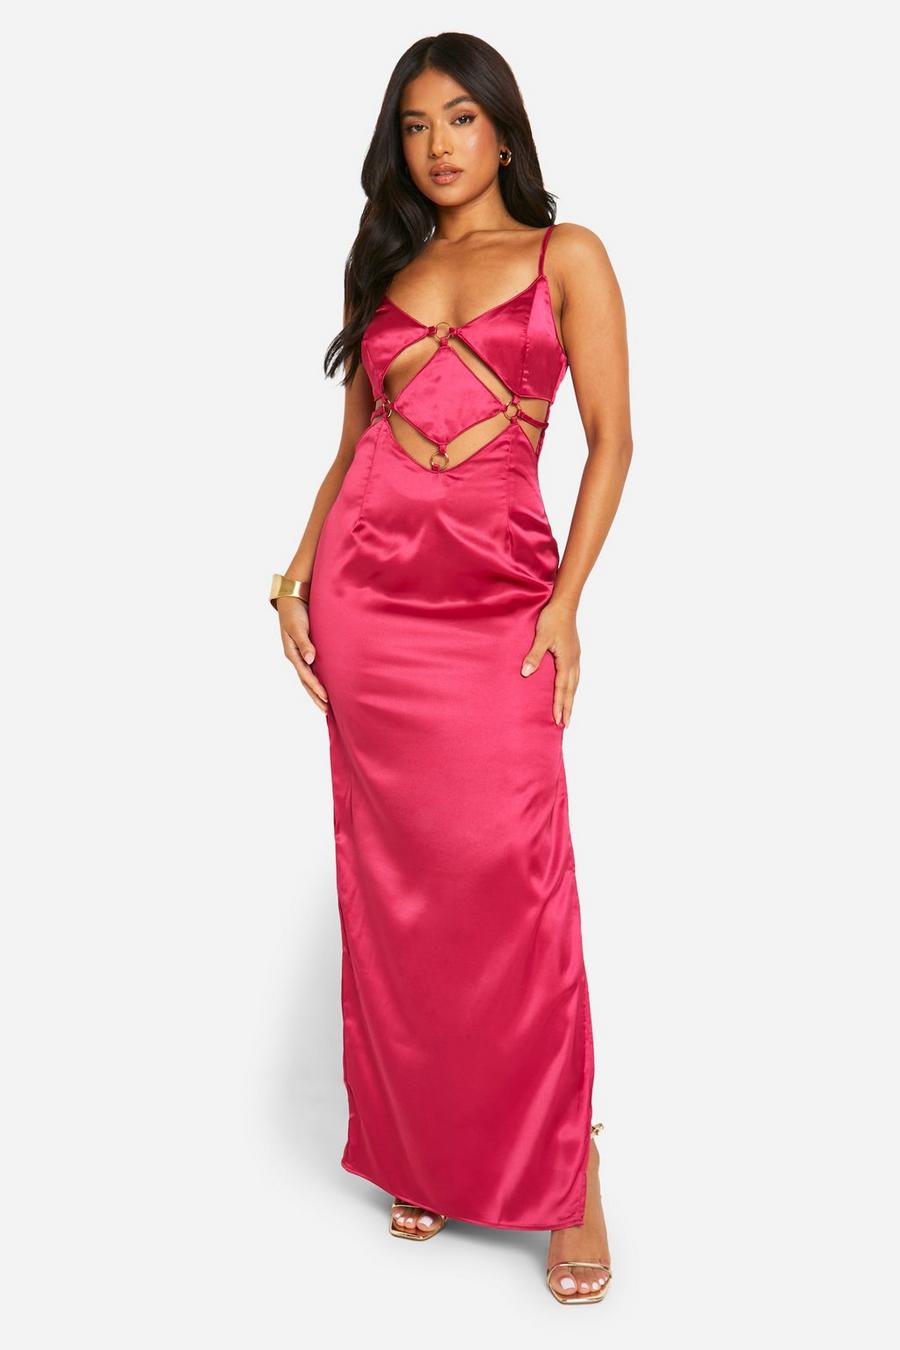 Hot pink Petite Satin Strappy Cut Out Maxi Slip Dress